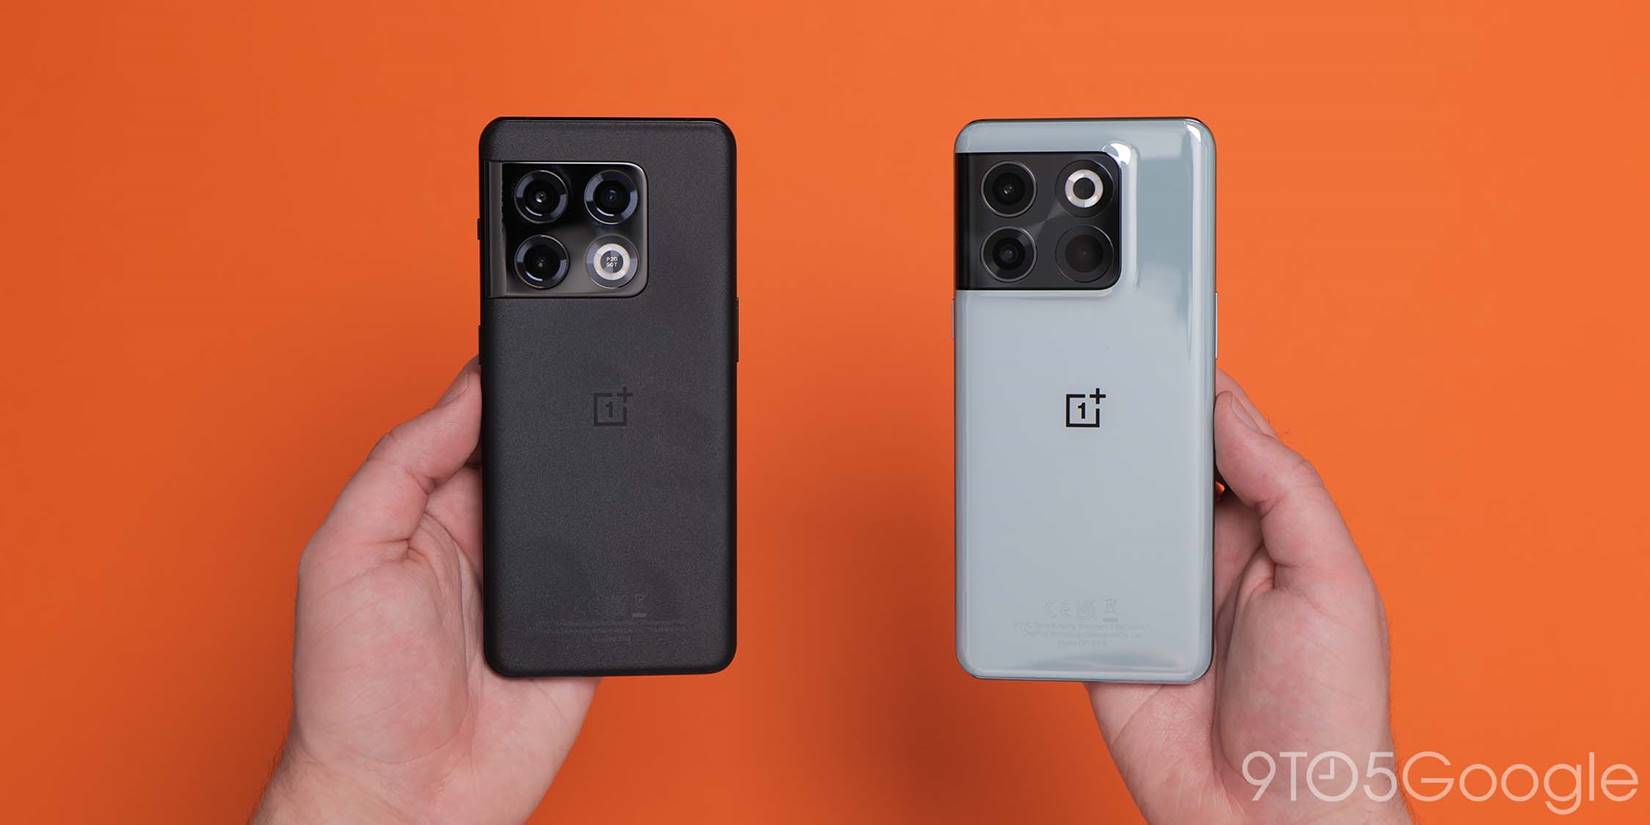 oneplus 10t or oneplus 10 pro